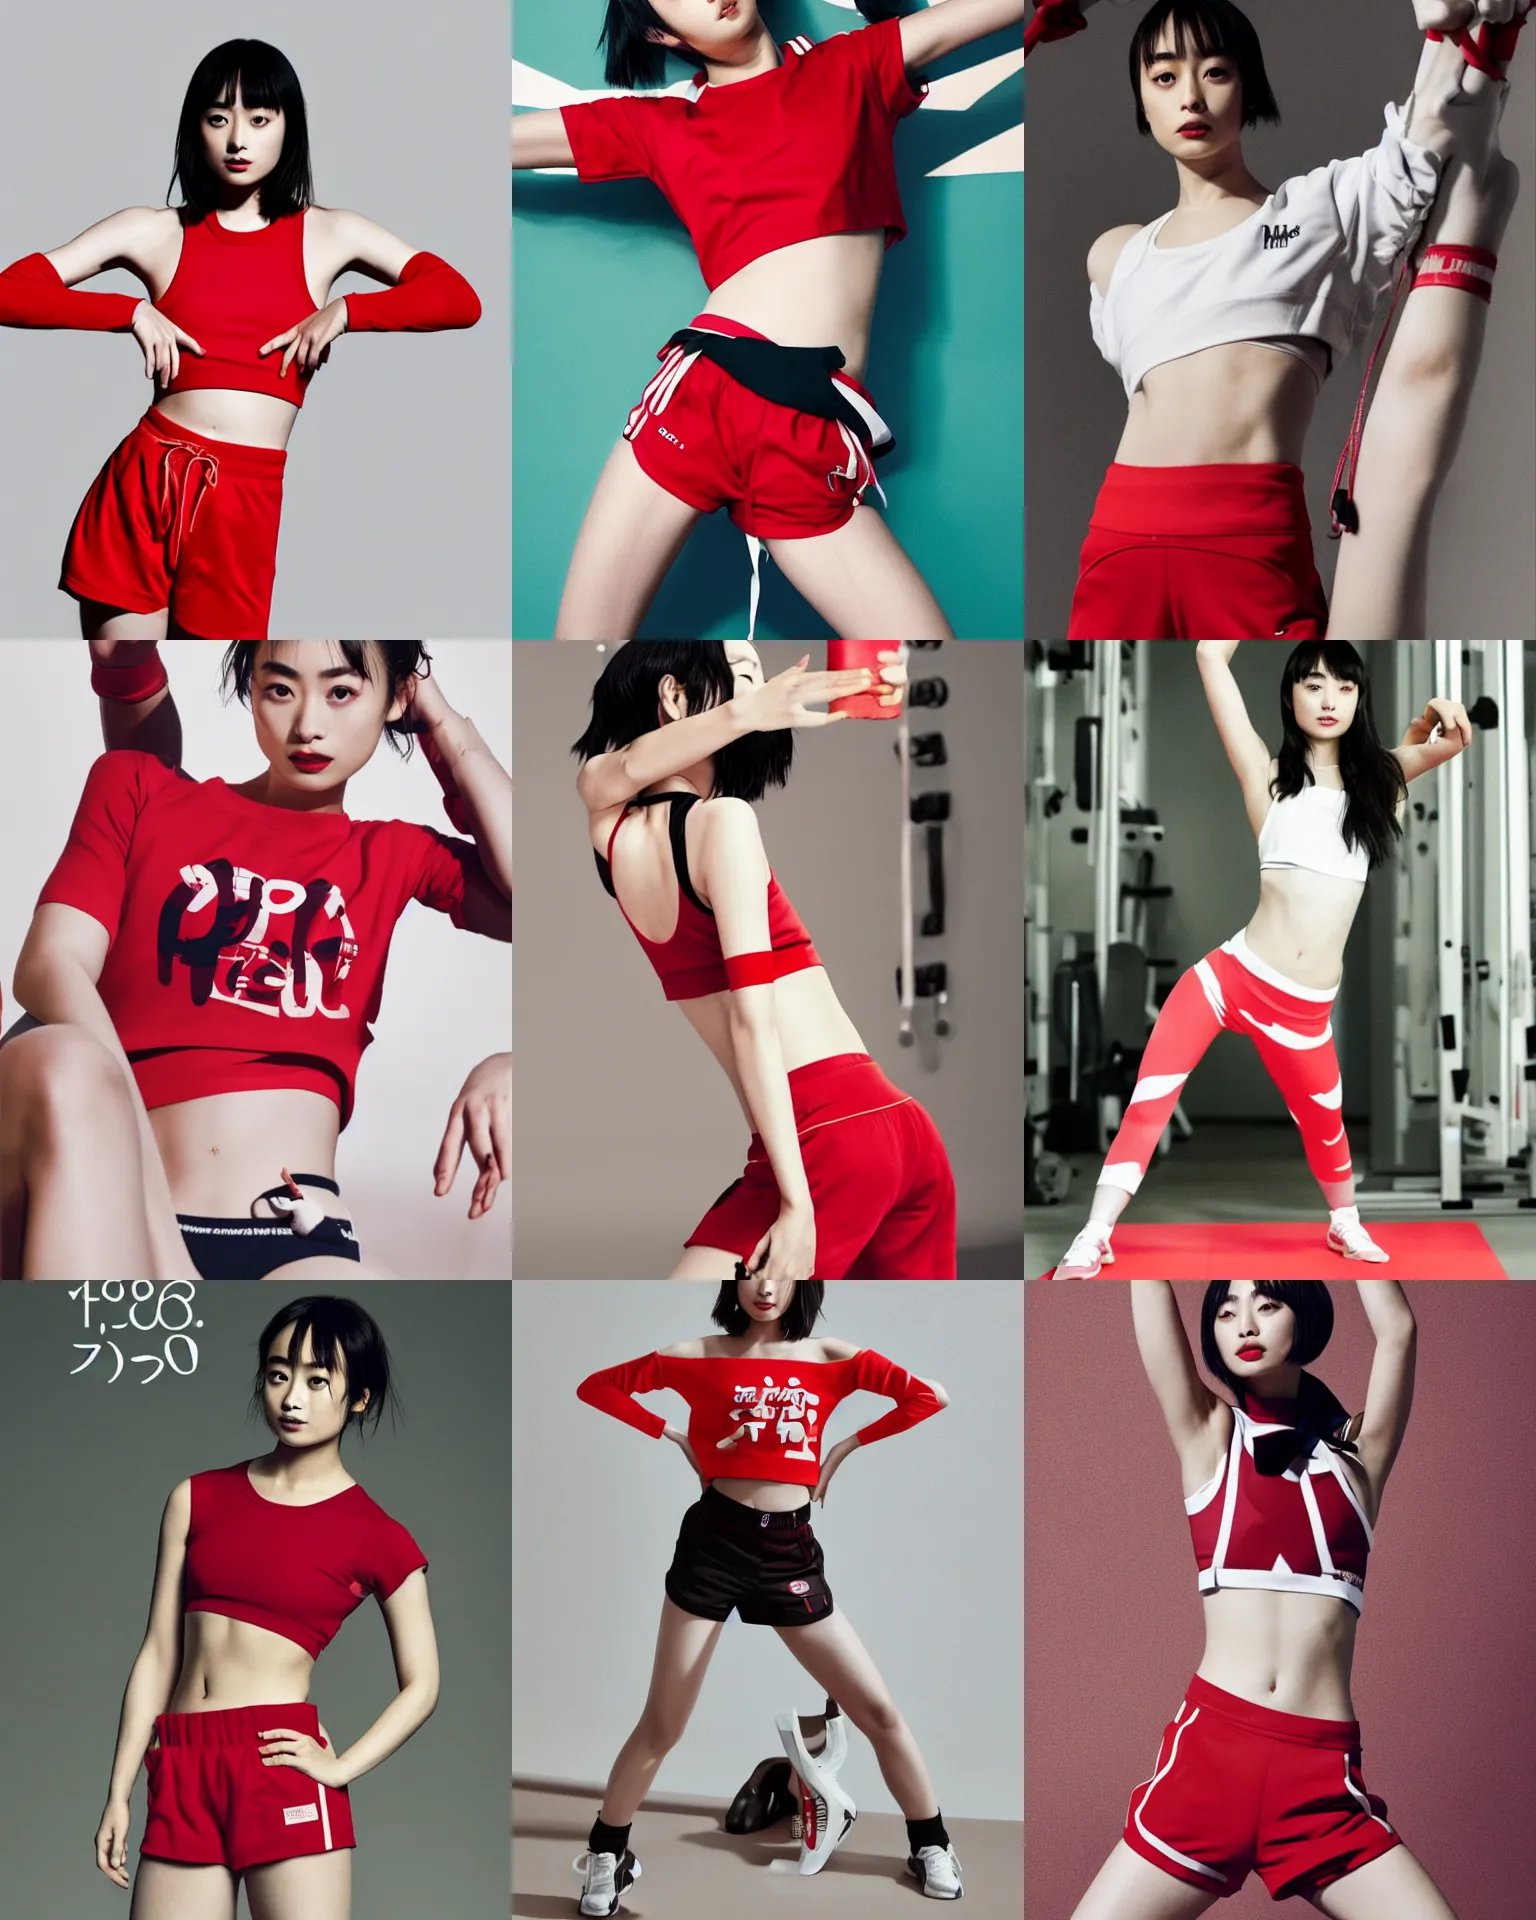 Prompt: suzu Hirose wearing crop red gym top with white lettering, cropped red yoga short, advertising photo by Mario Testino, masterwork